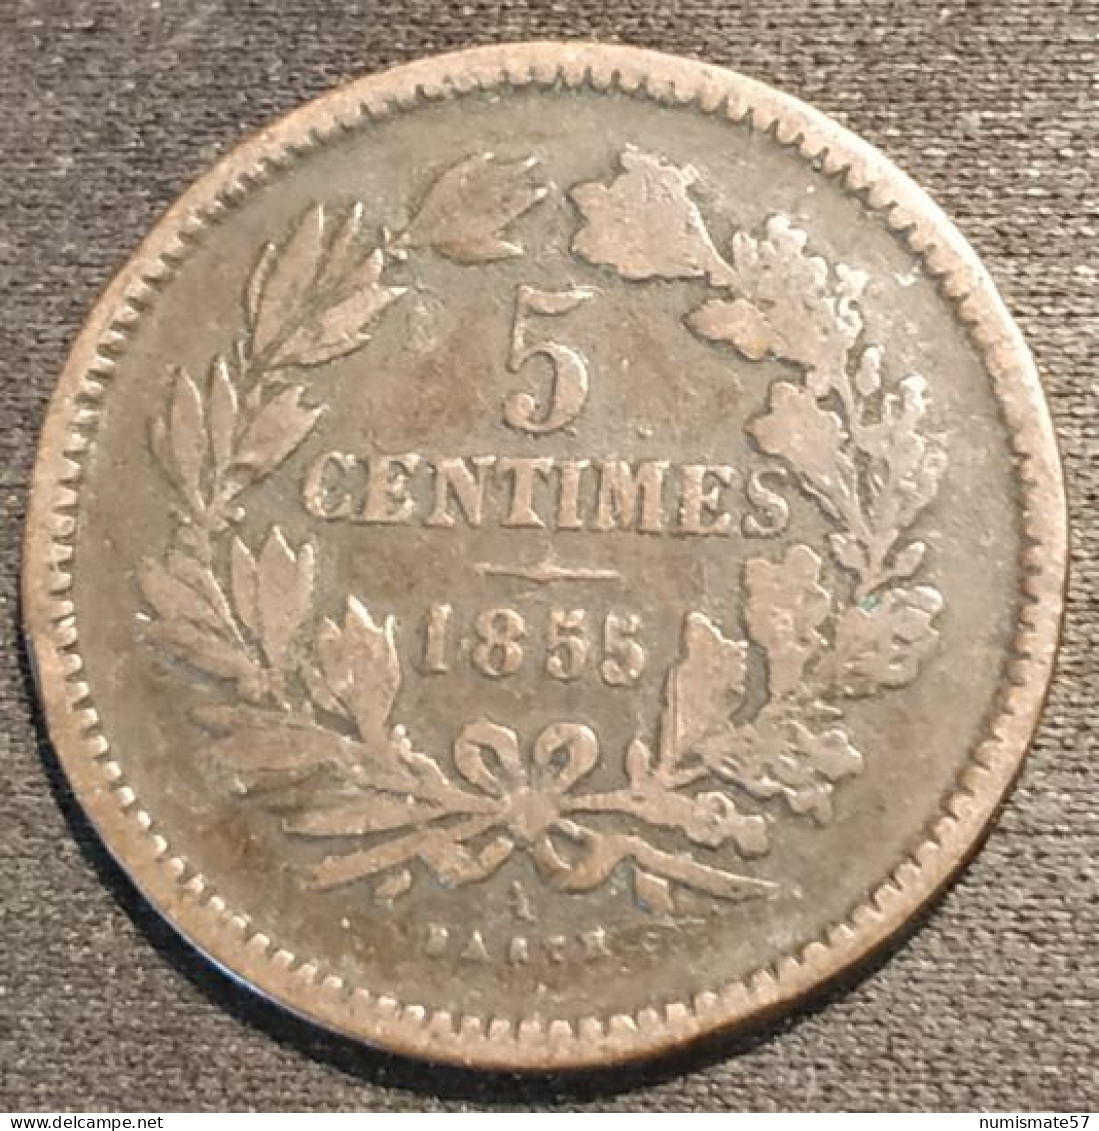 LUXEMBOURG - 5 CENTIMES 1855 - Guillaume III - KM 22 - Luxembourg